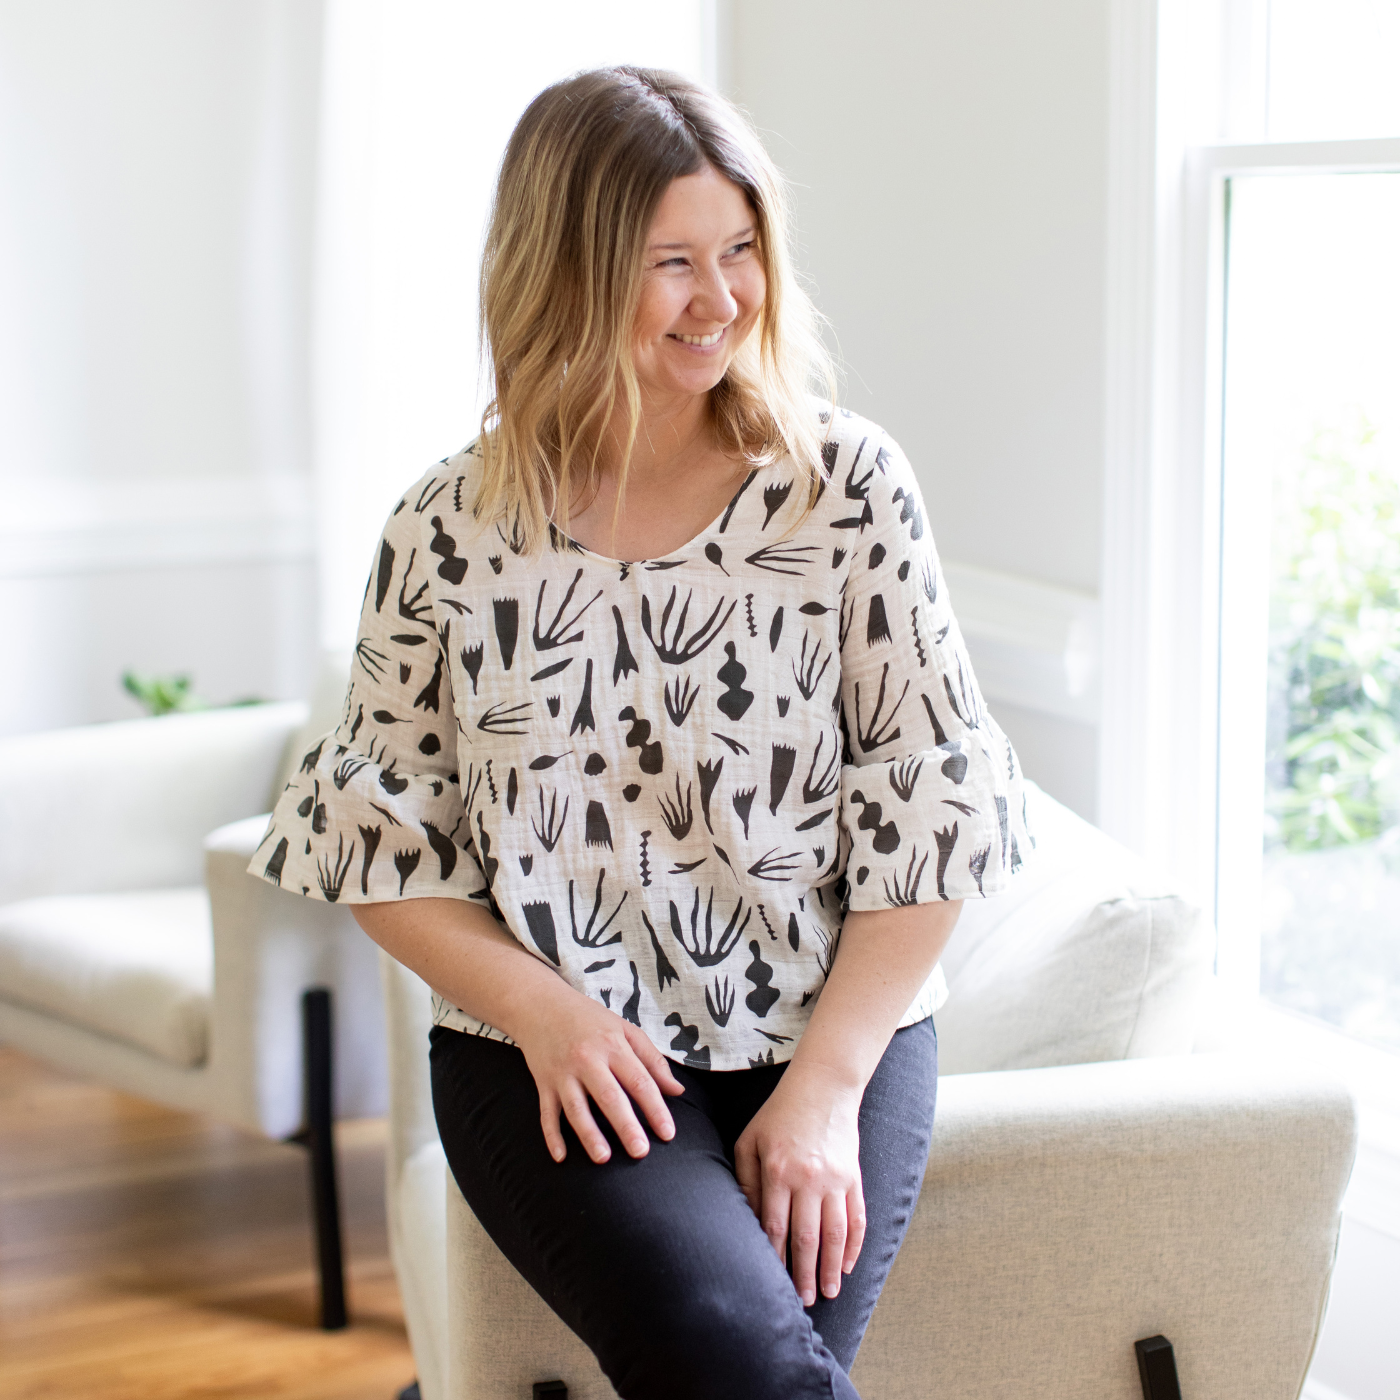 Katherine looks to the left and smiles, sitting on the arm of a white sofa. She wears a white top with ruffle sleeves and a black geometric pattern and black pants. Two large windows are to her left.